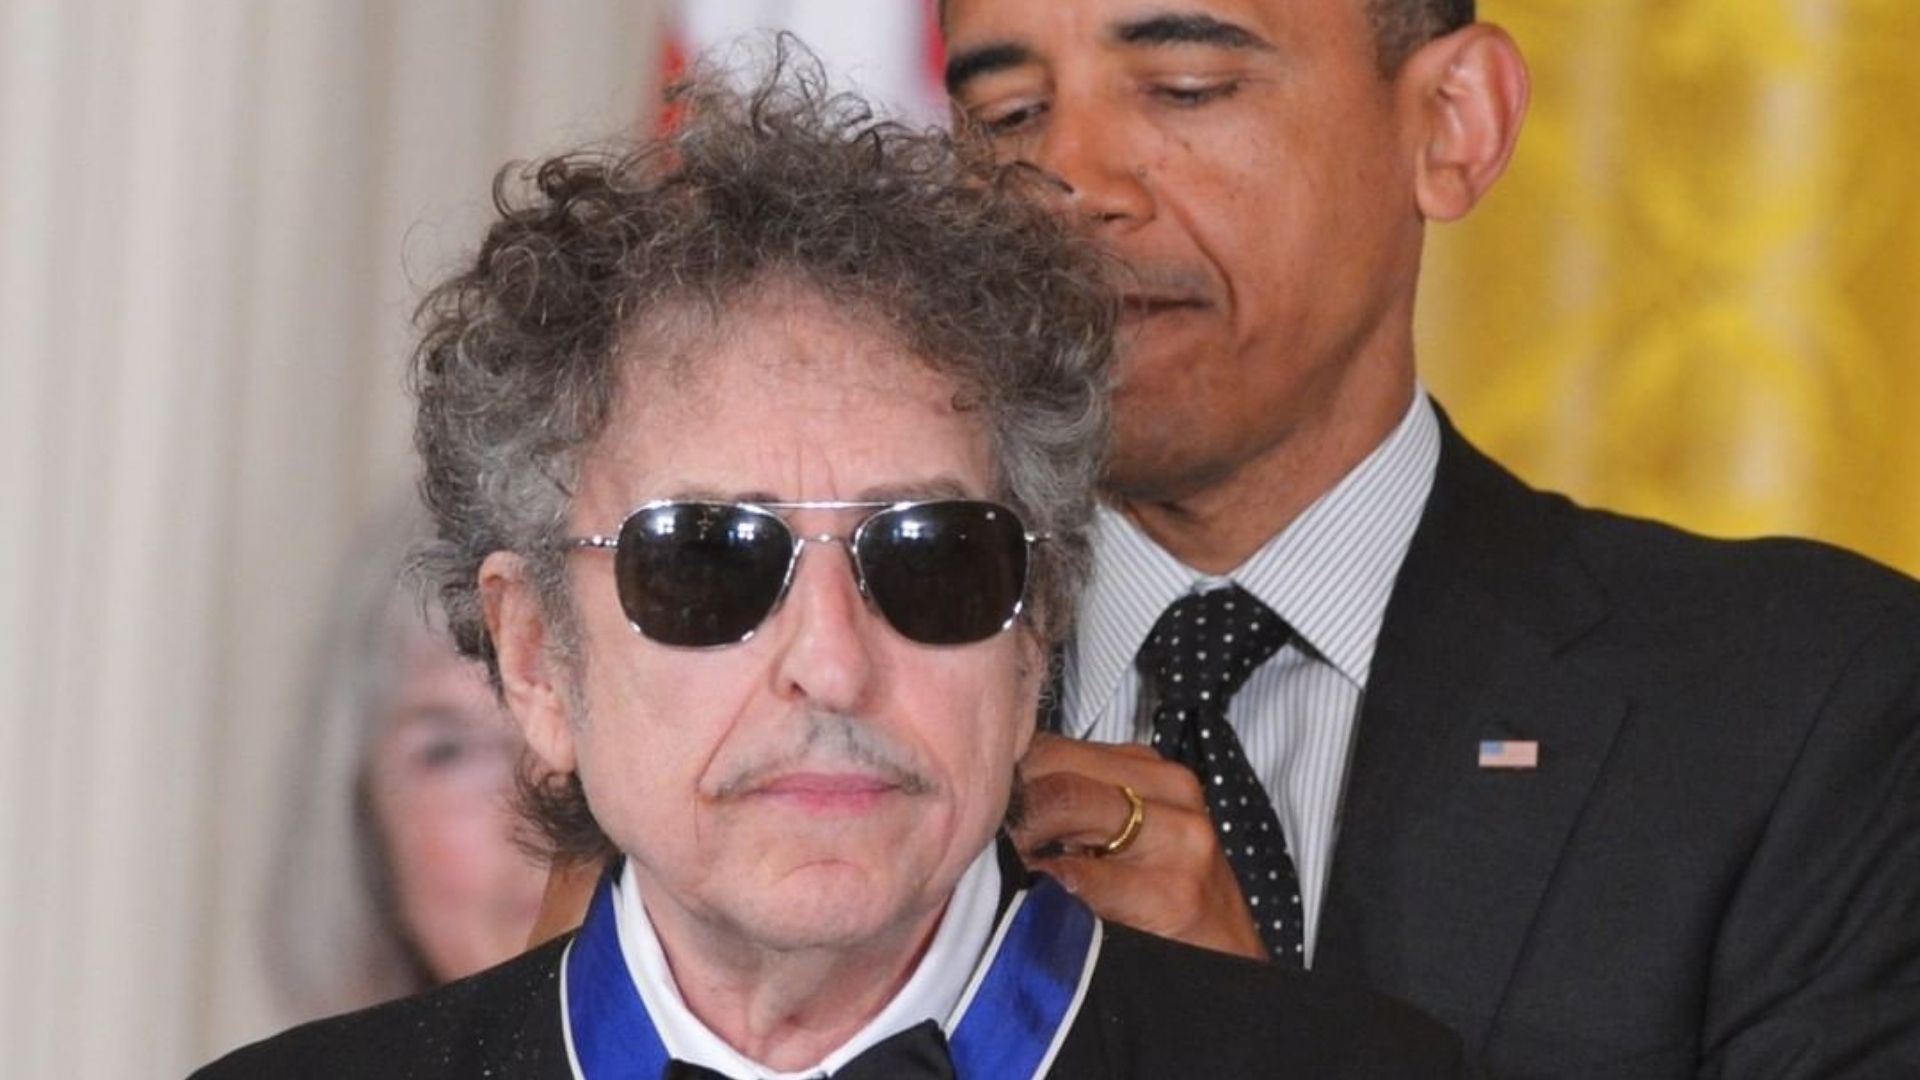 Forbes highest paid entertainers list 2022: Bob Dylan